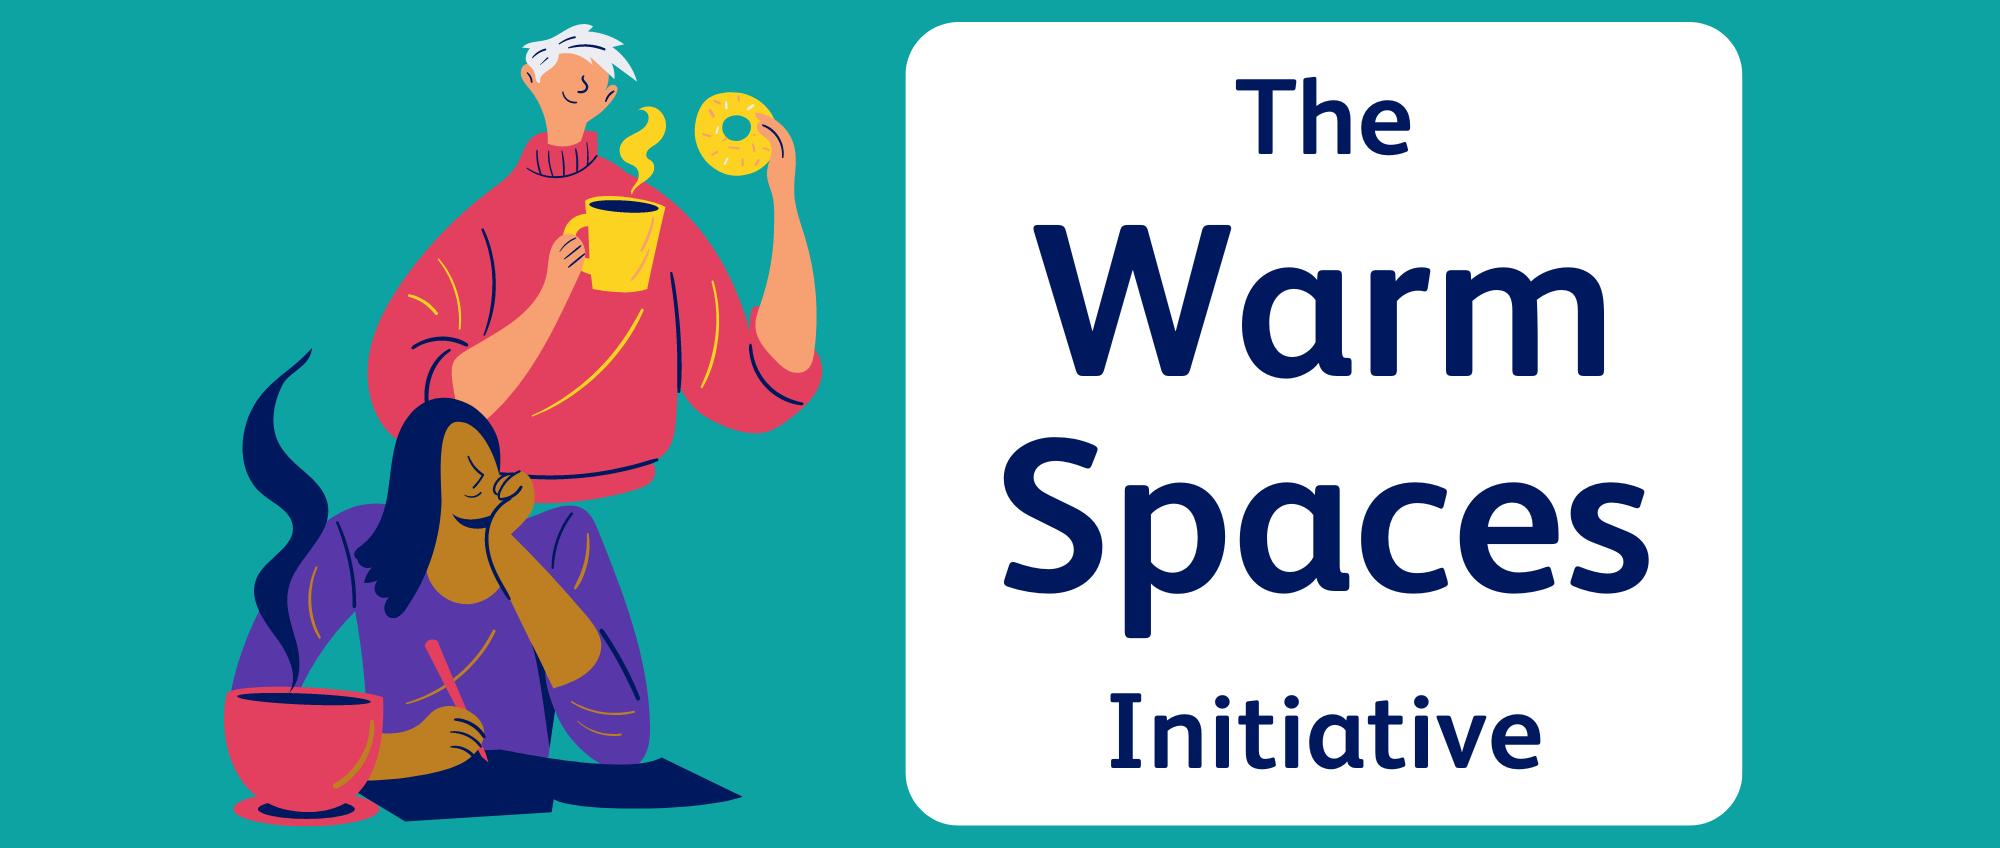 The Warm Spaces Initiative